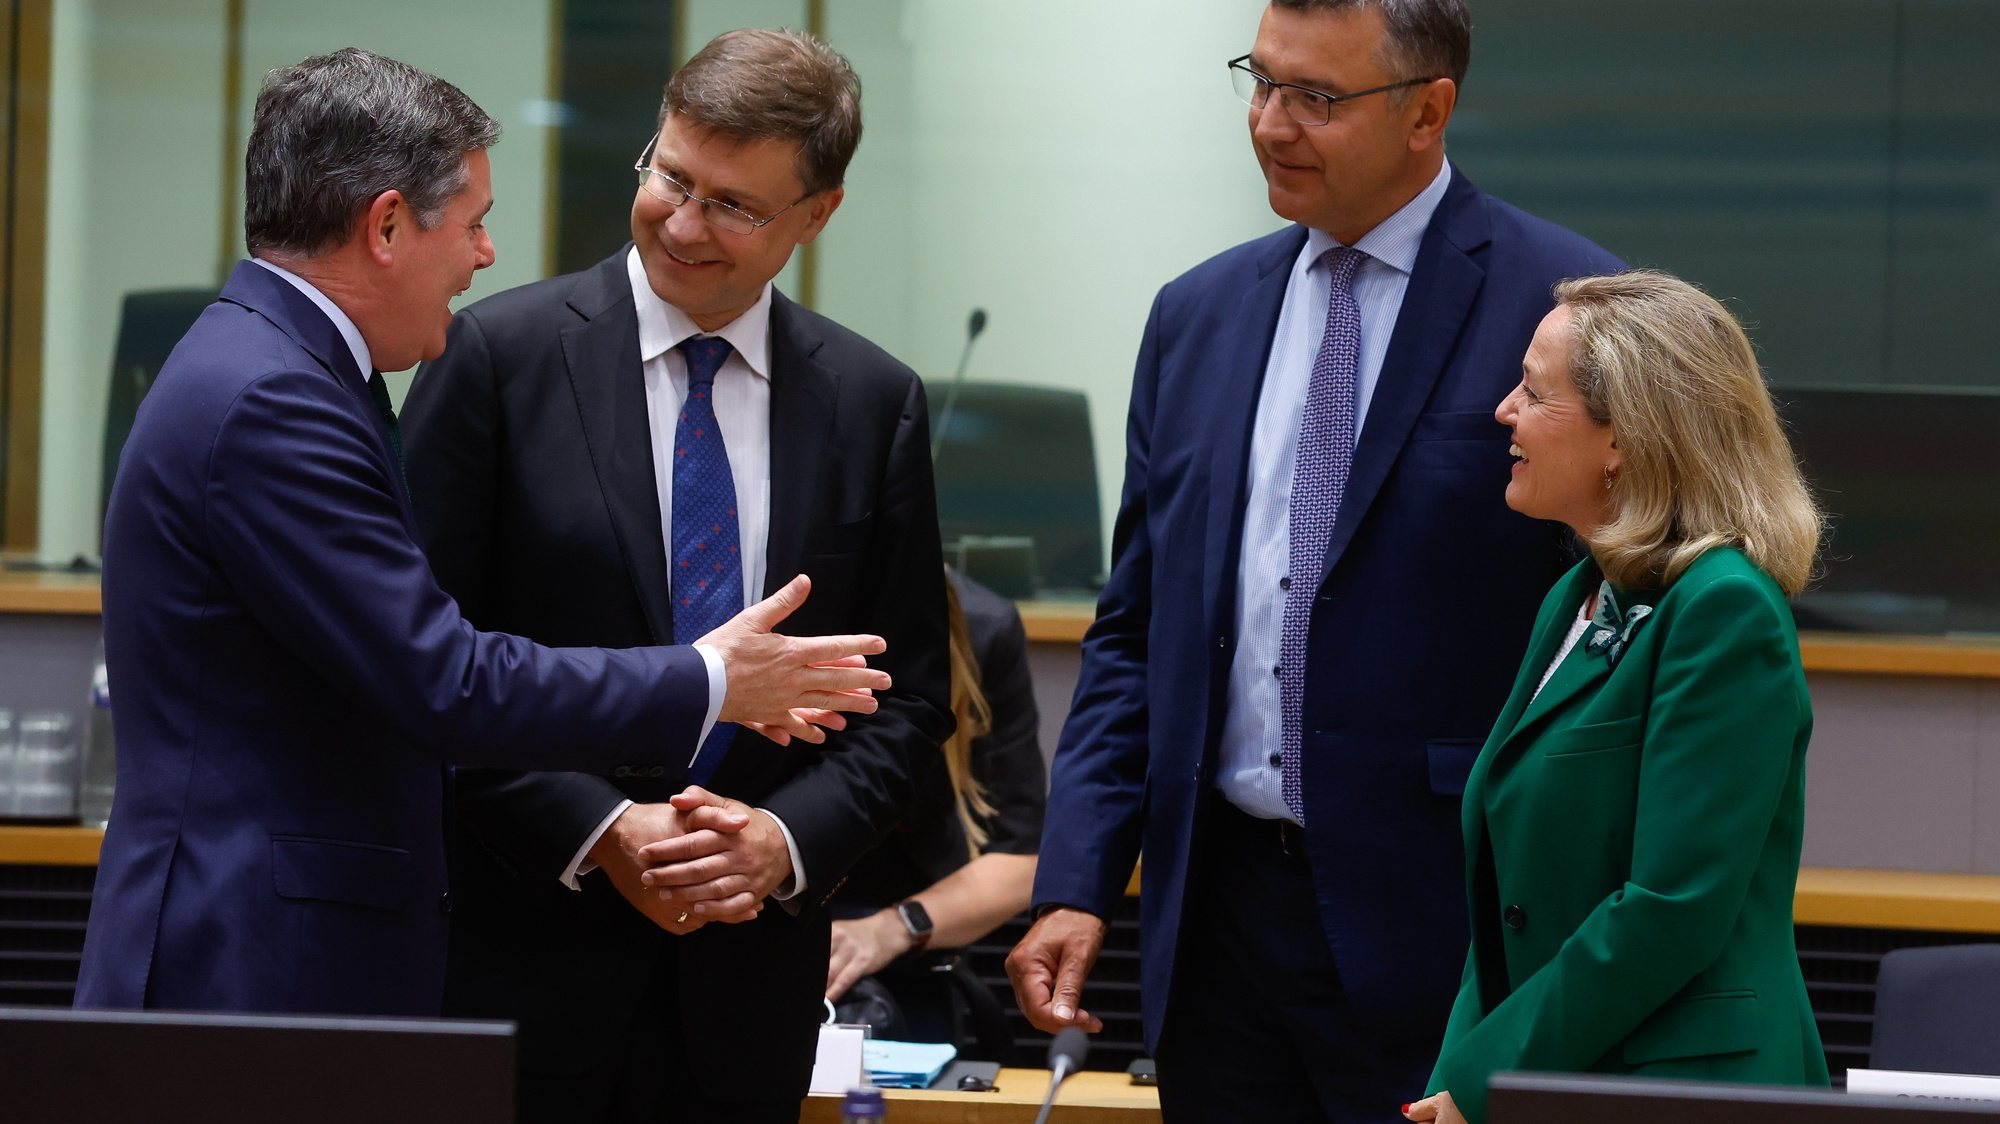 epa10065128 (L-R) President of the Eurogroup and Irish Finance Minister Paschal Donohoe, European Commission Executive Vice President Valdis Dombrovskis,  Latvian Finance Minister Janis Reirs and  Spanish Economy Minister Nadia Calvino  a the start of an Eurogroup meeting at the European Council in Brussels, Belgium, 11 July 2022.  EPA/STEPHANIE LECOCQ